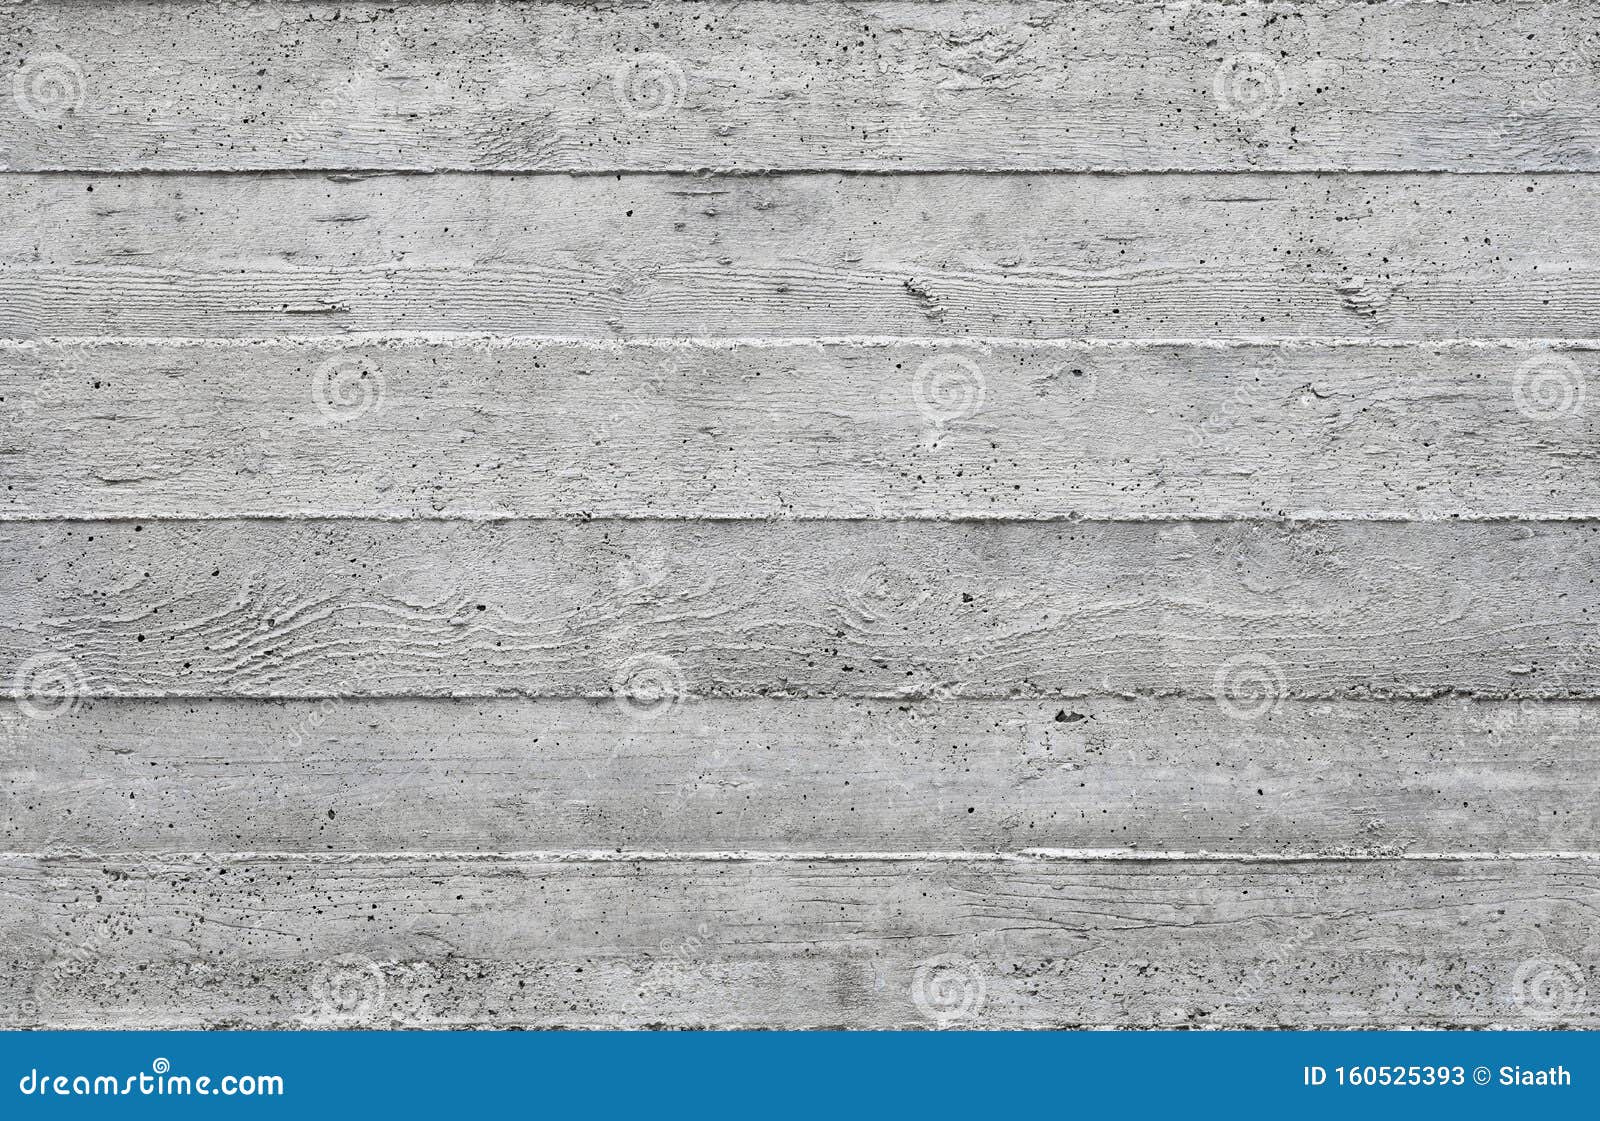 Board Formed Concrete Seamless Texture Stock Image - Image of formwork,  formed: 160525393